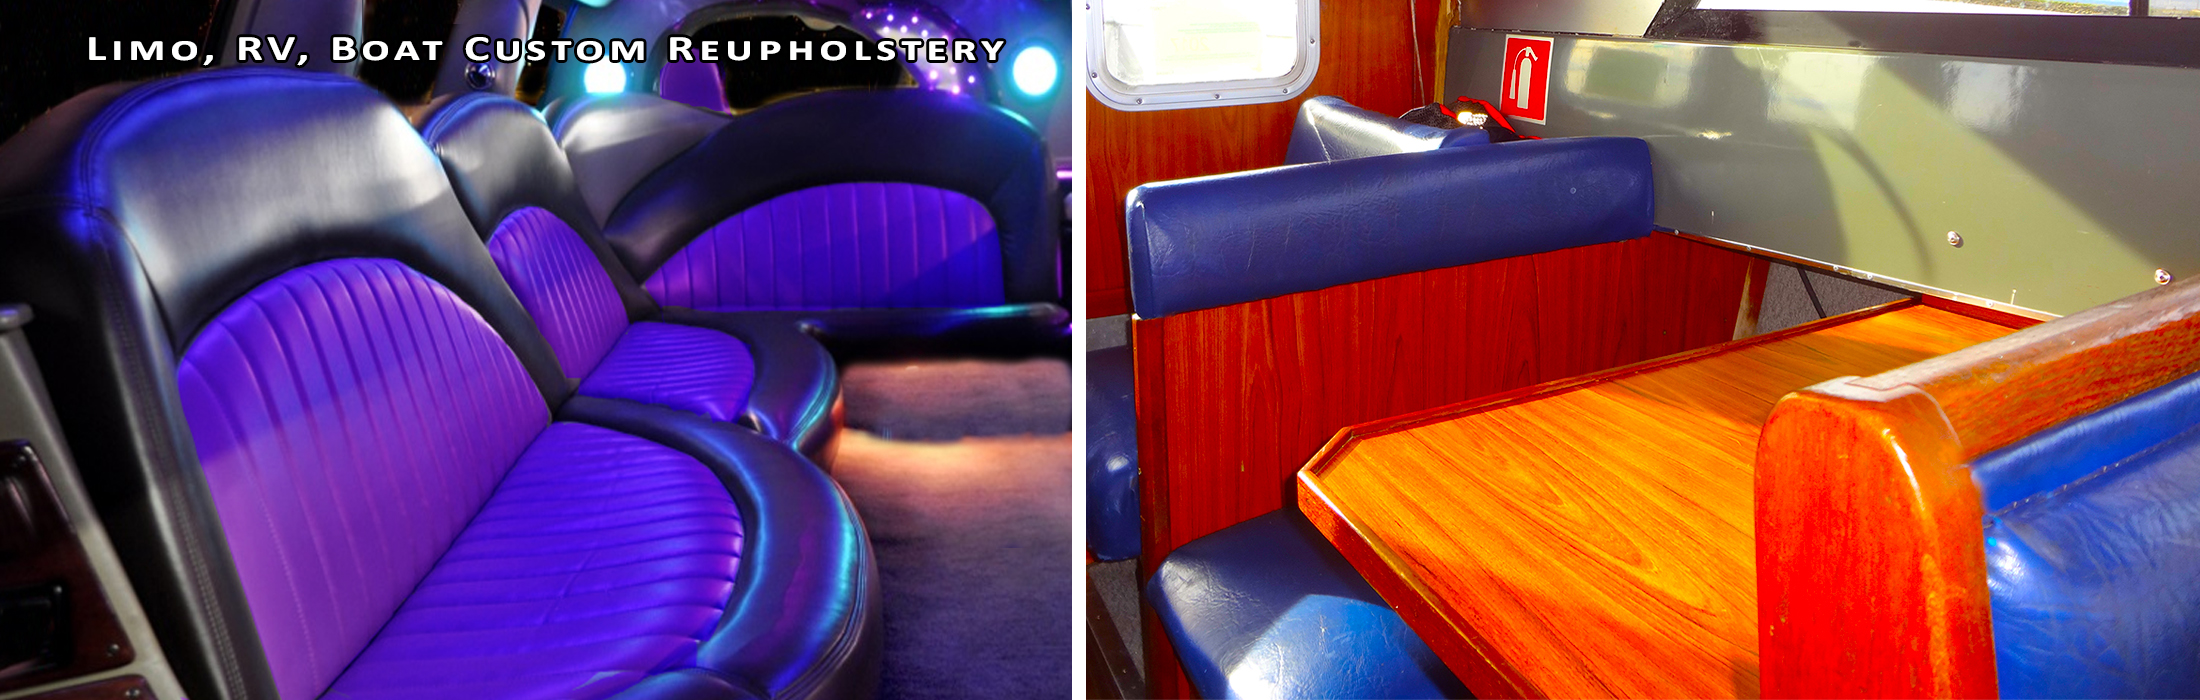 Limo, RV, Boat Custom Reupholstery by Pacific Design Furniture